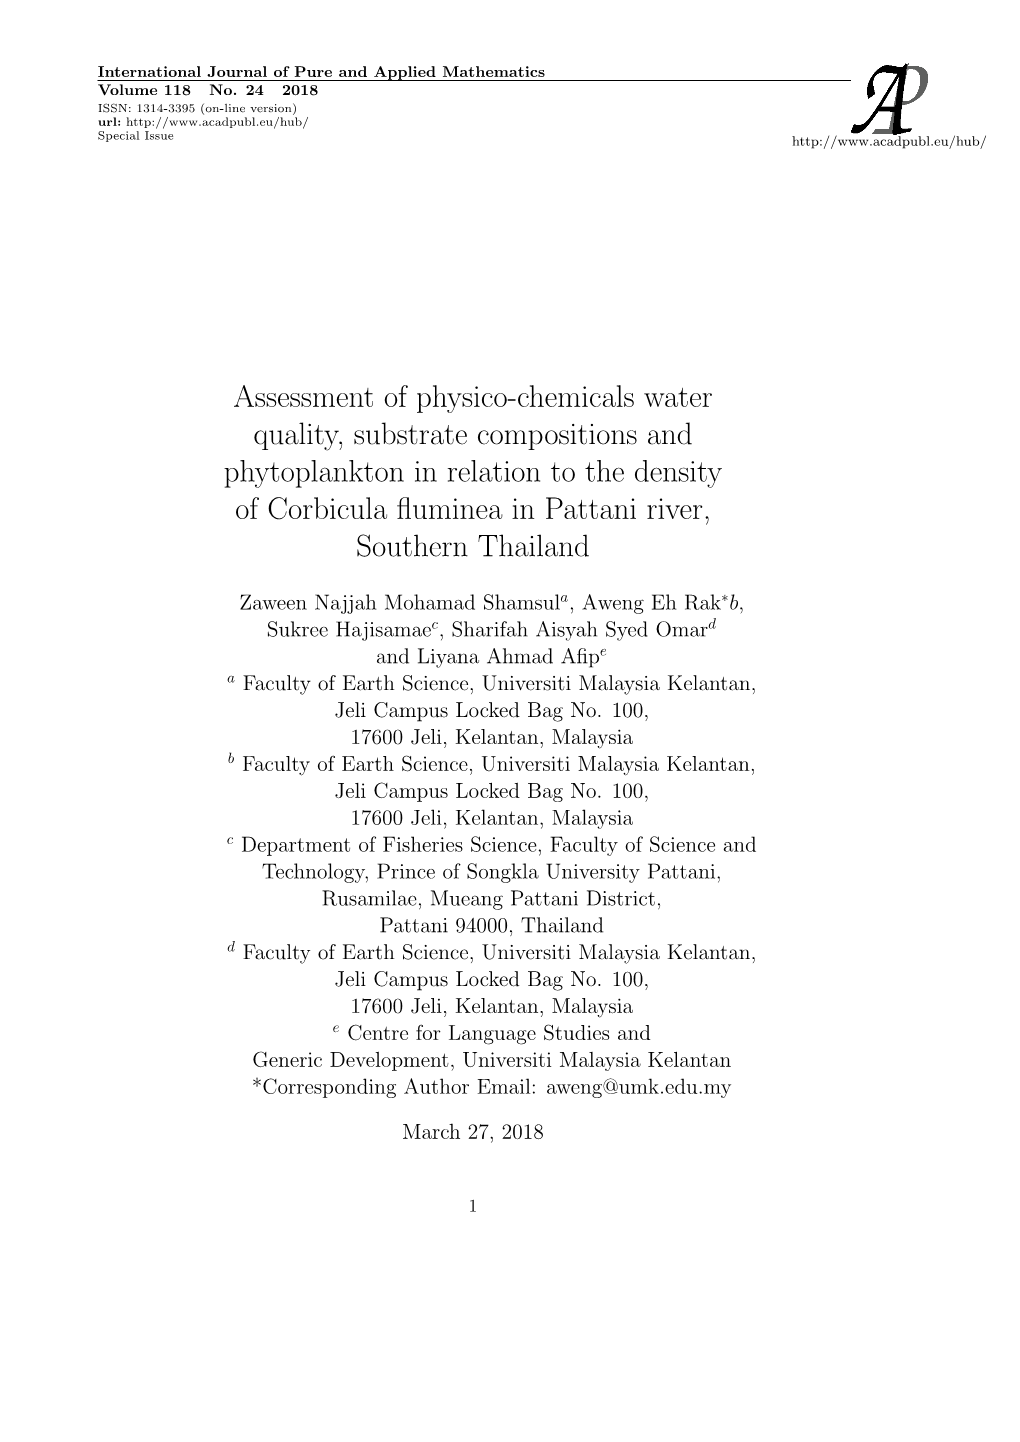 Assessment of Physico-Chemicals Water Quality, Substrate